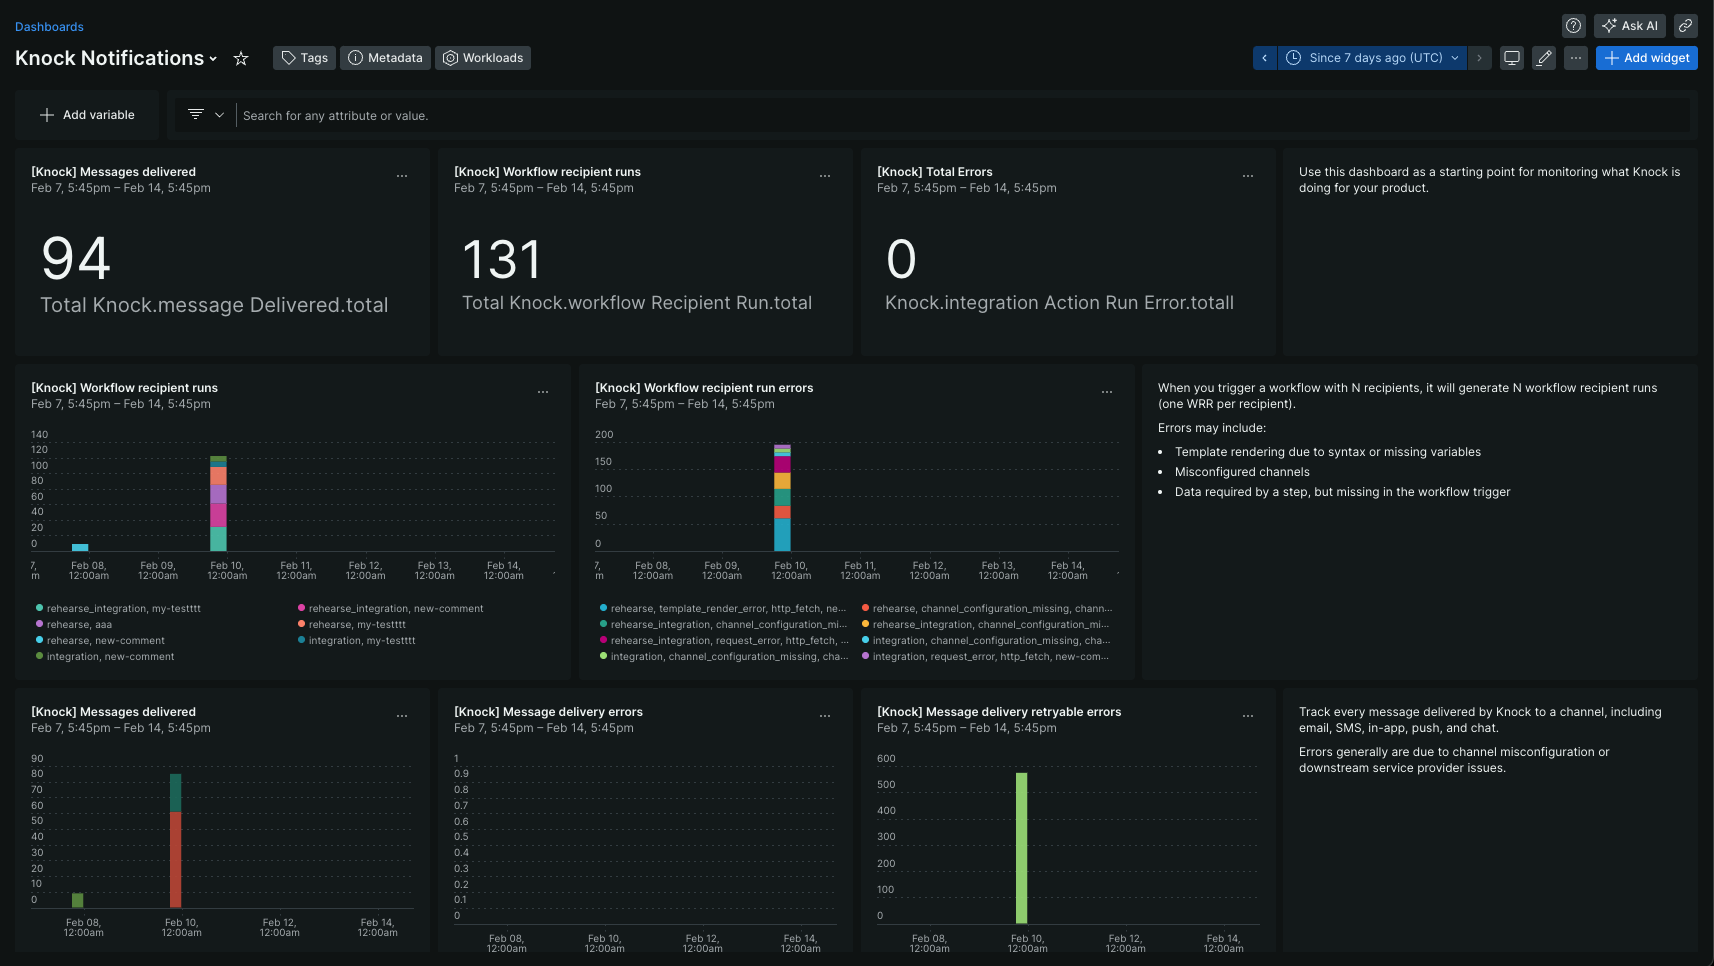 The Knock New Relic Dashboard in action